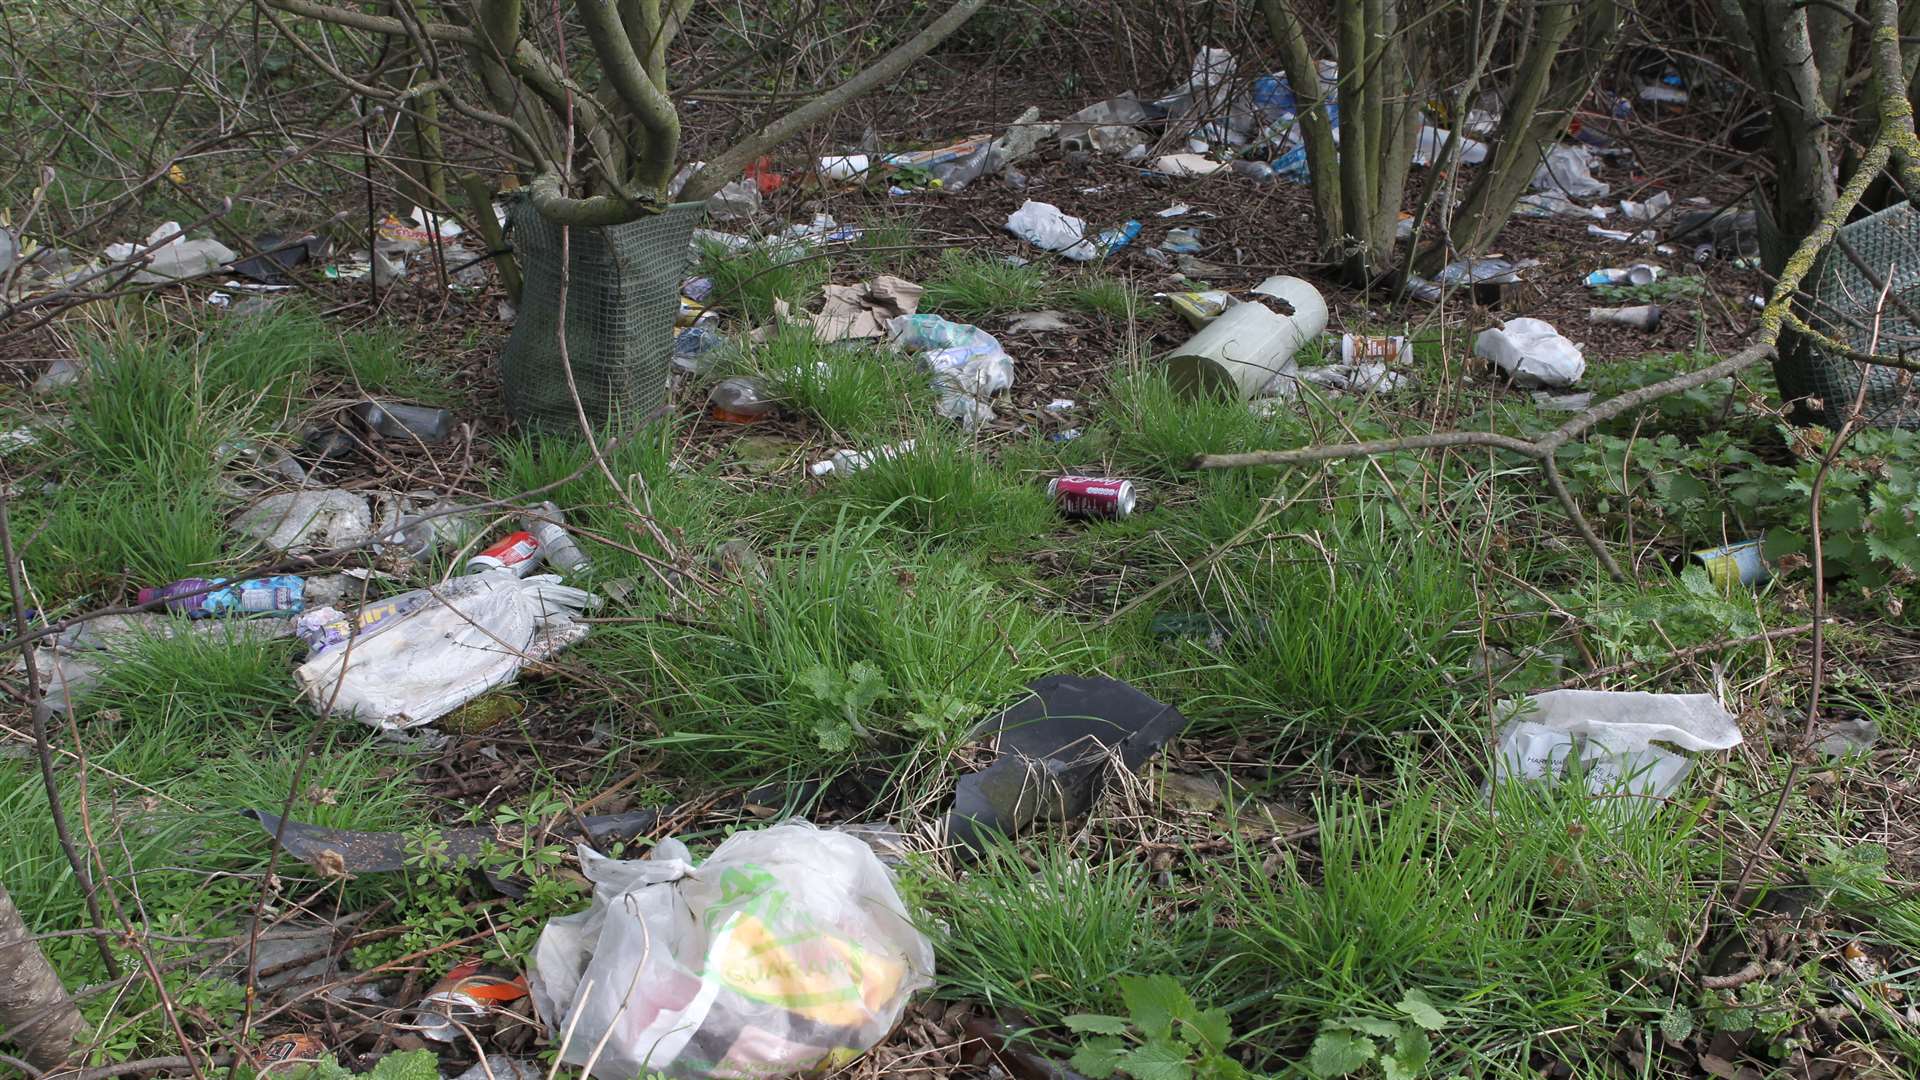 Litter found along the lay-by Sittingbourne-bound on the A249 just along from the Sheppey bridge crossing